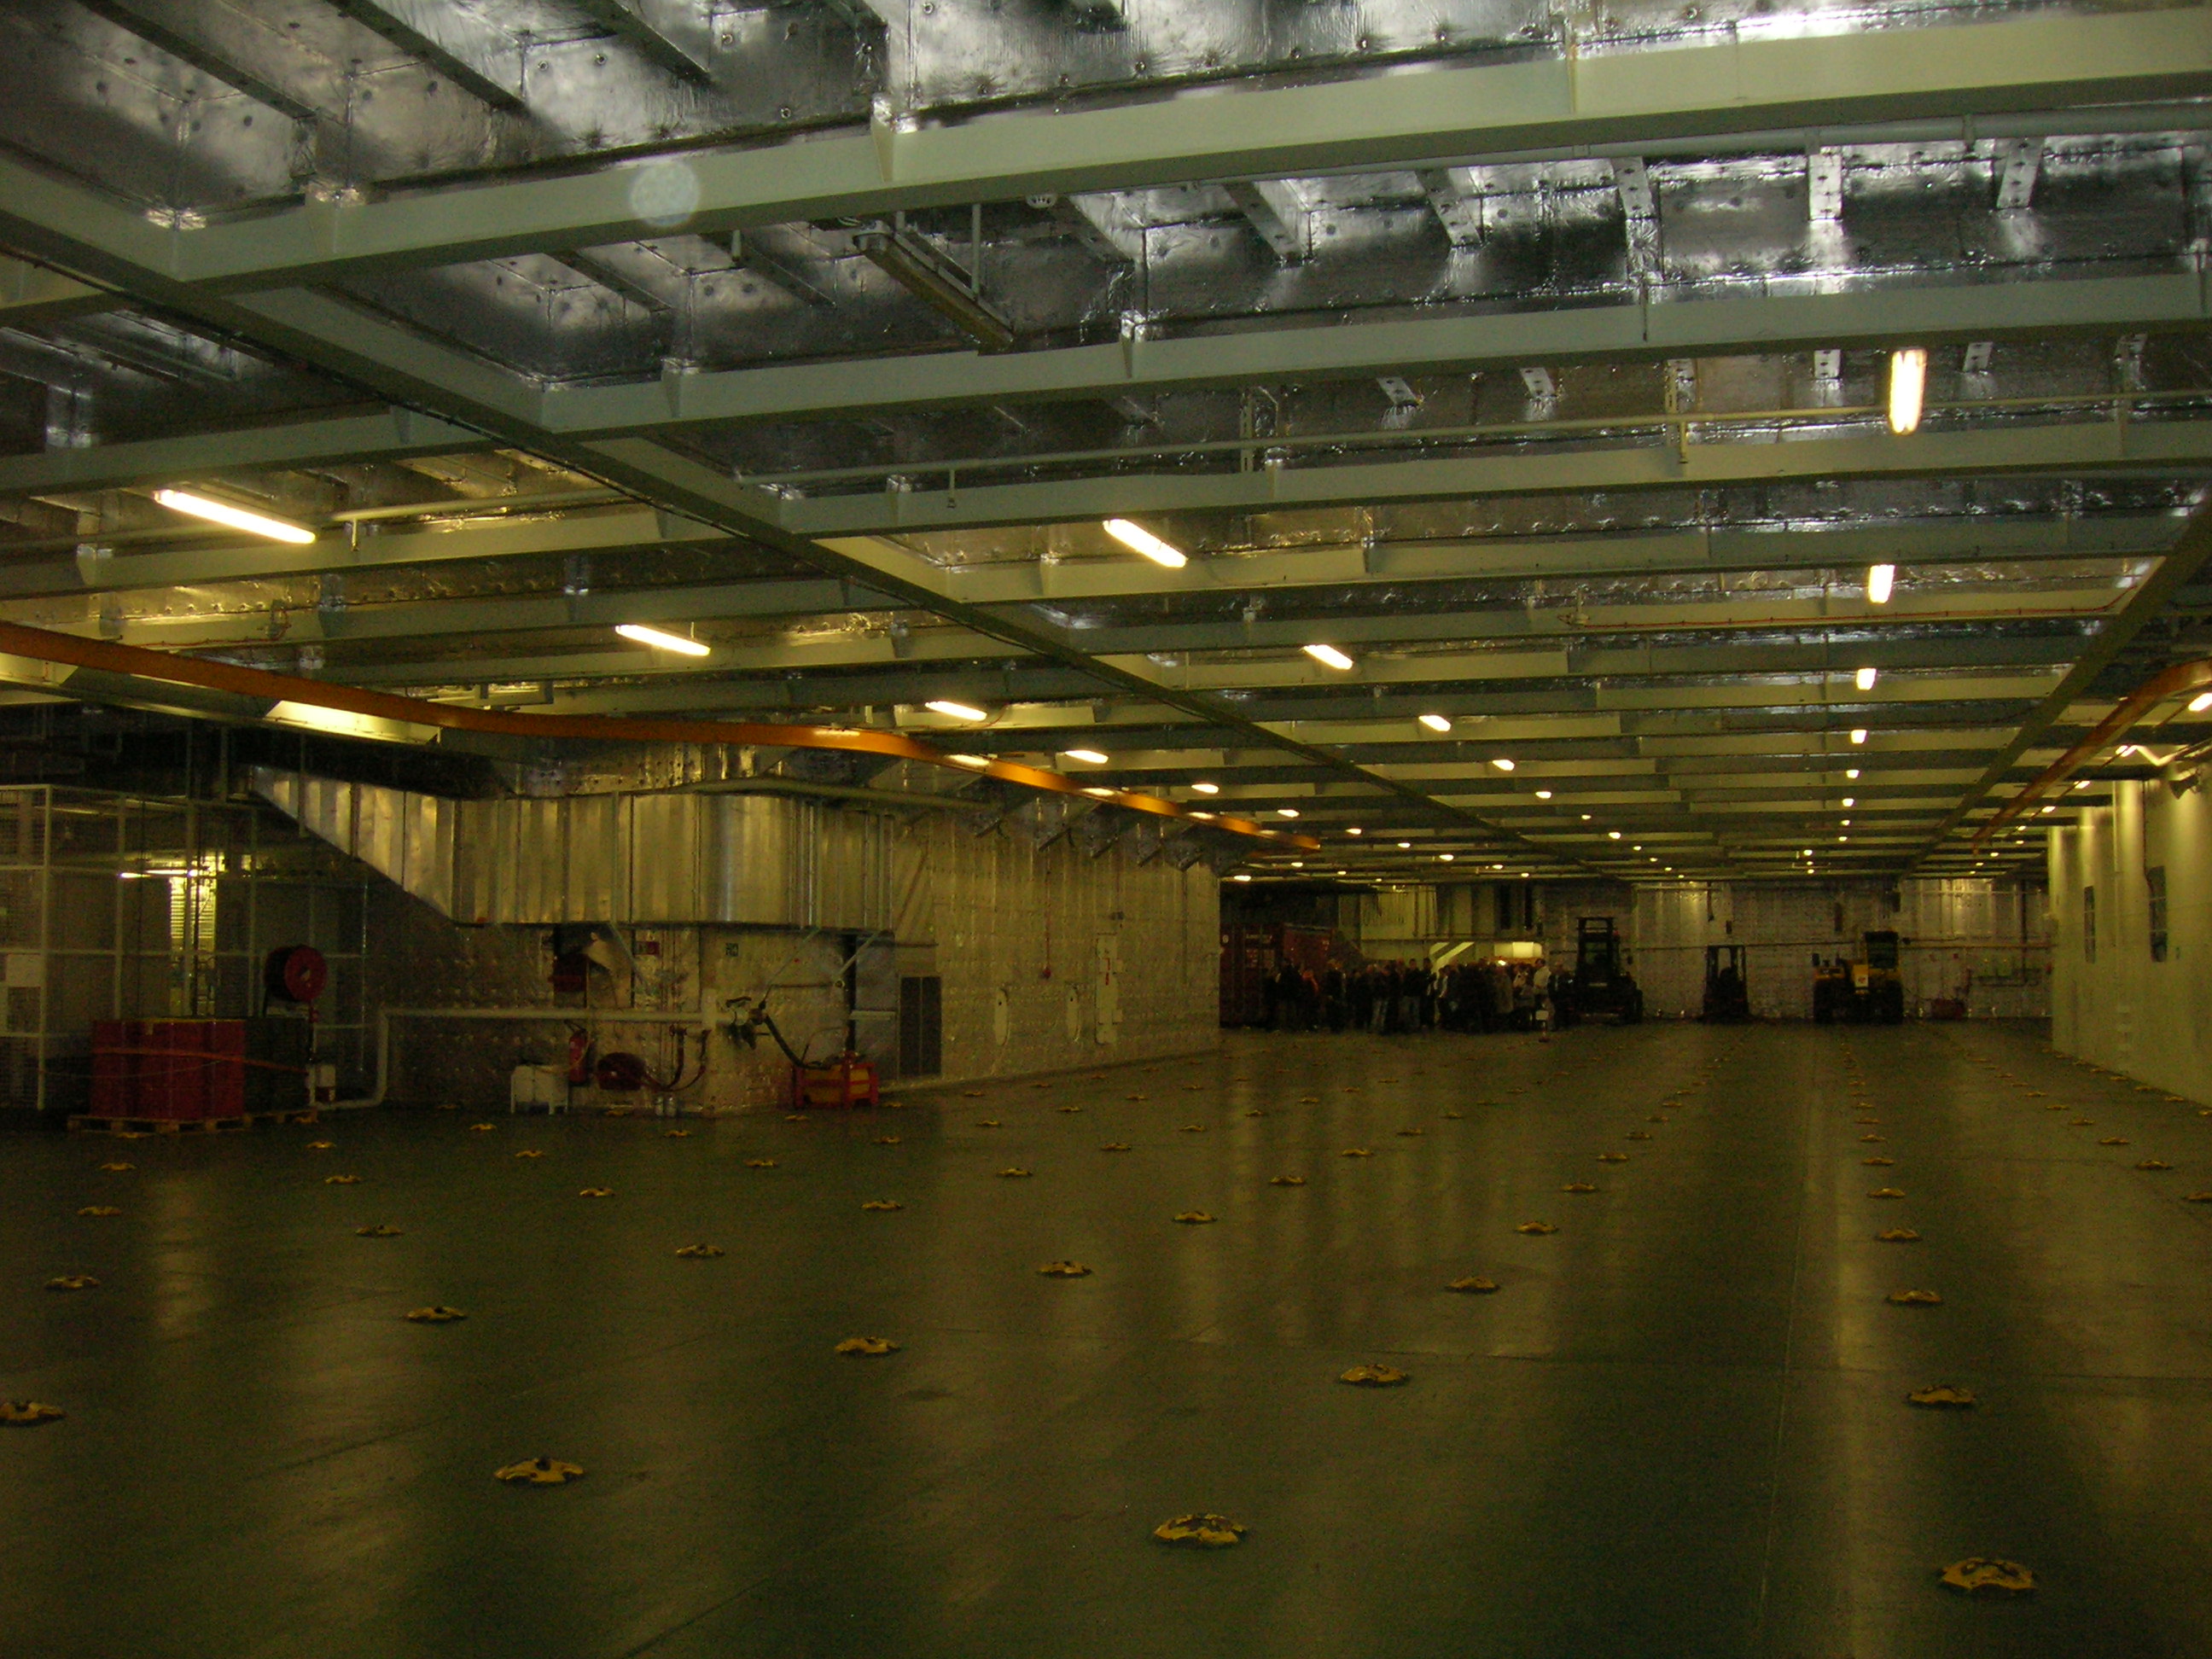 (004) 2650m² Hangar for 59 armored vehicles